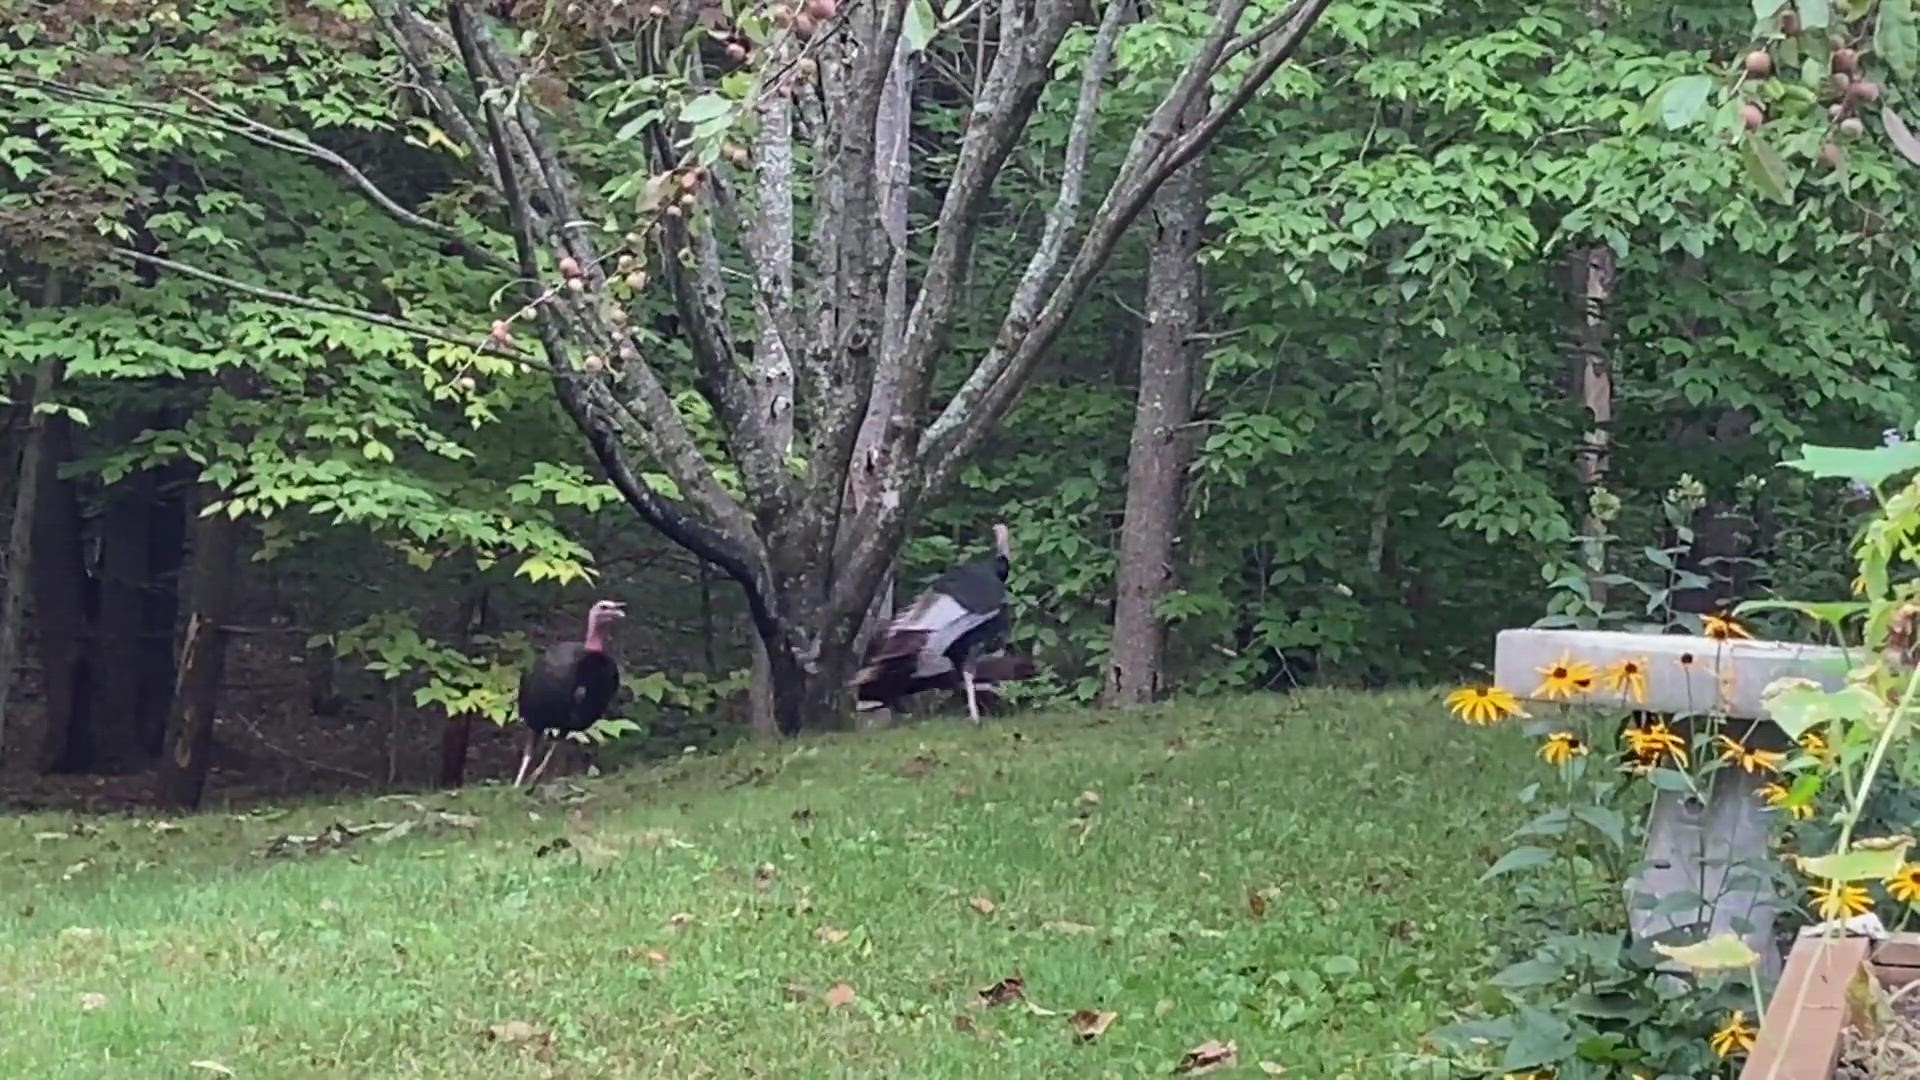 We've all seen a merry-go-round, but may we introduce you to a turkey-go-round? Credit: Donny Couillard